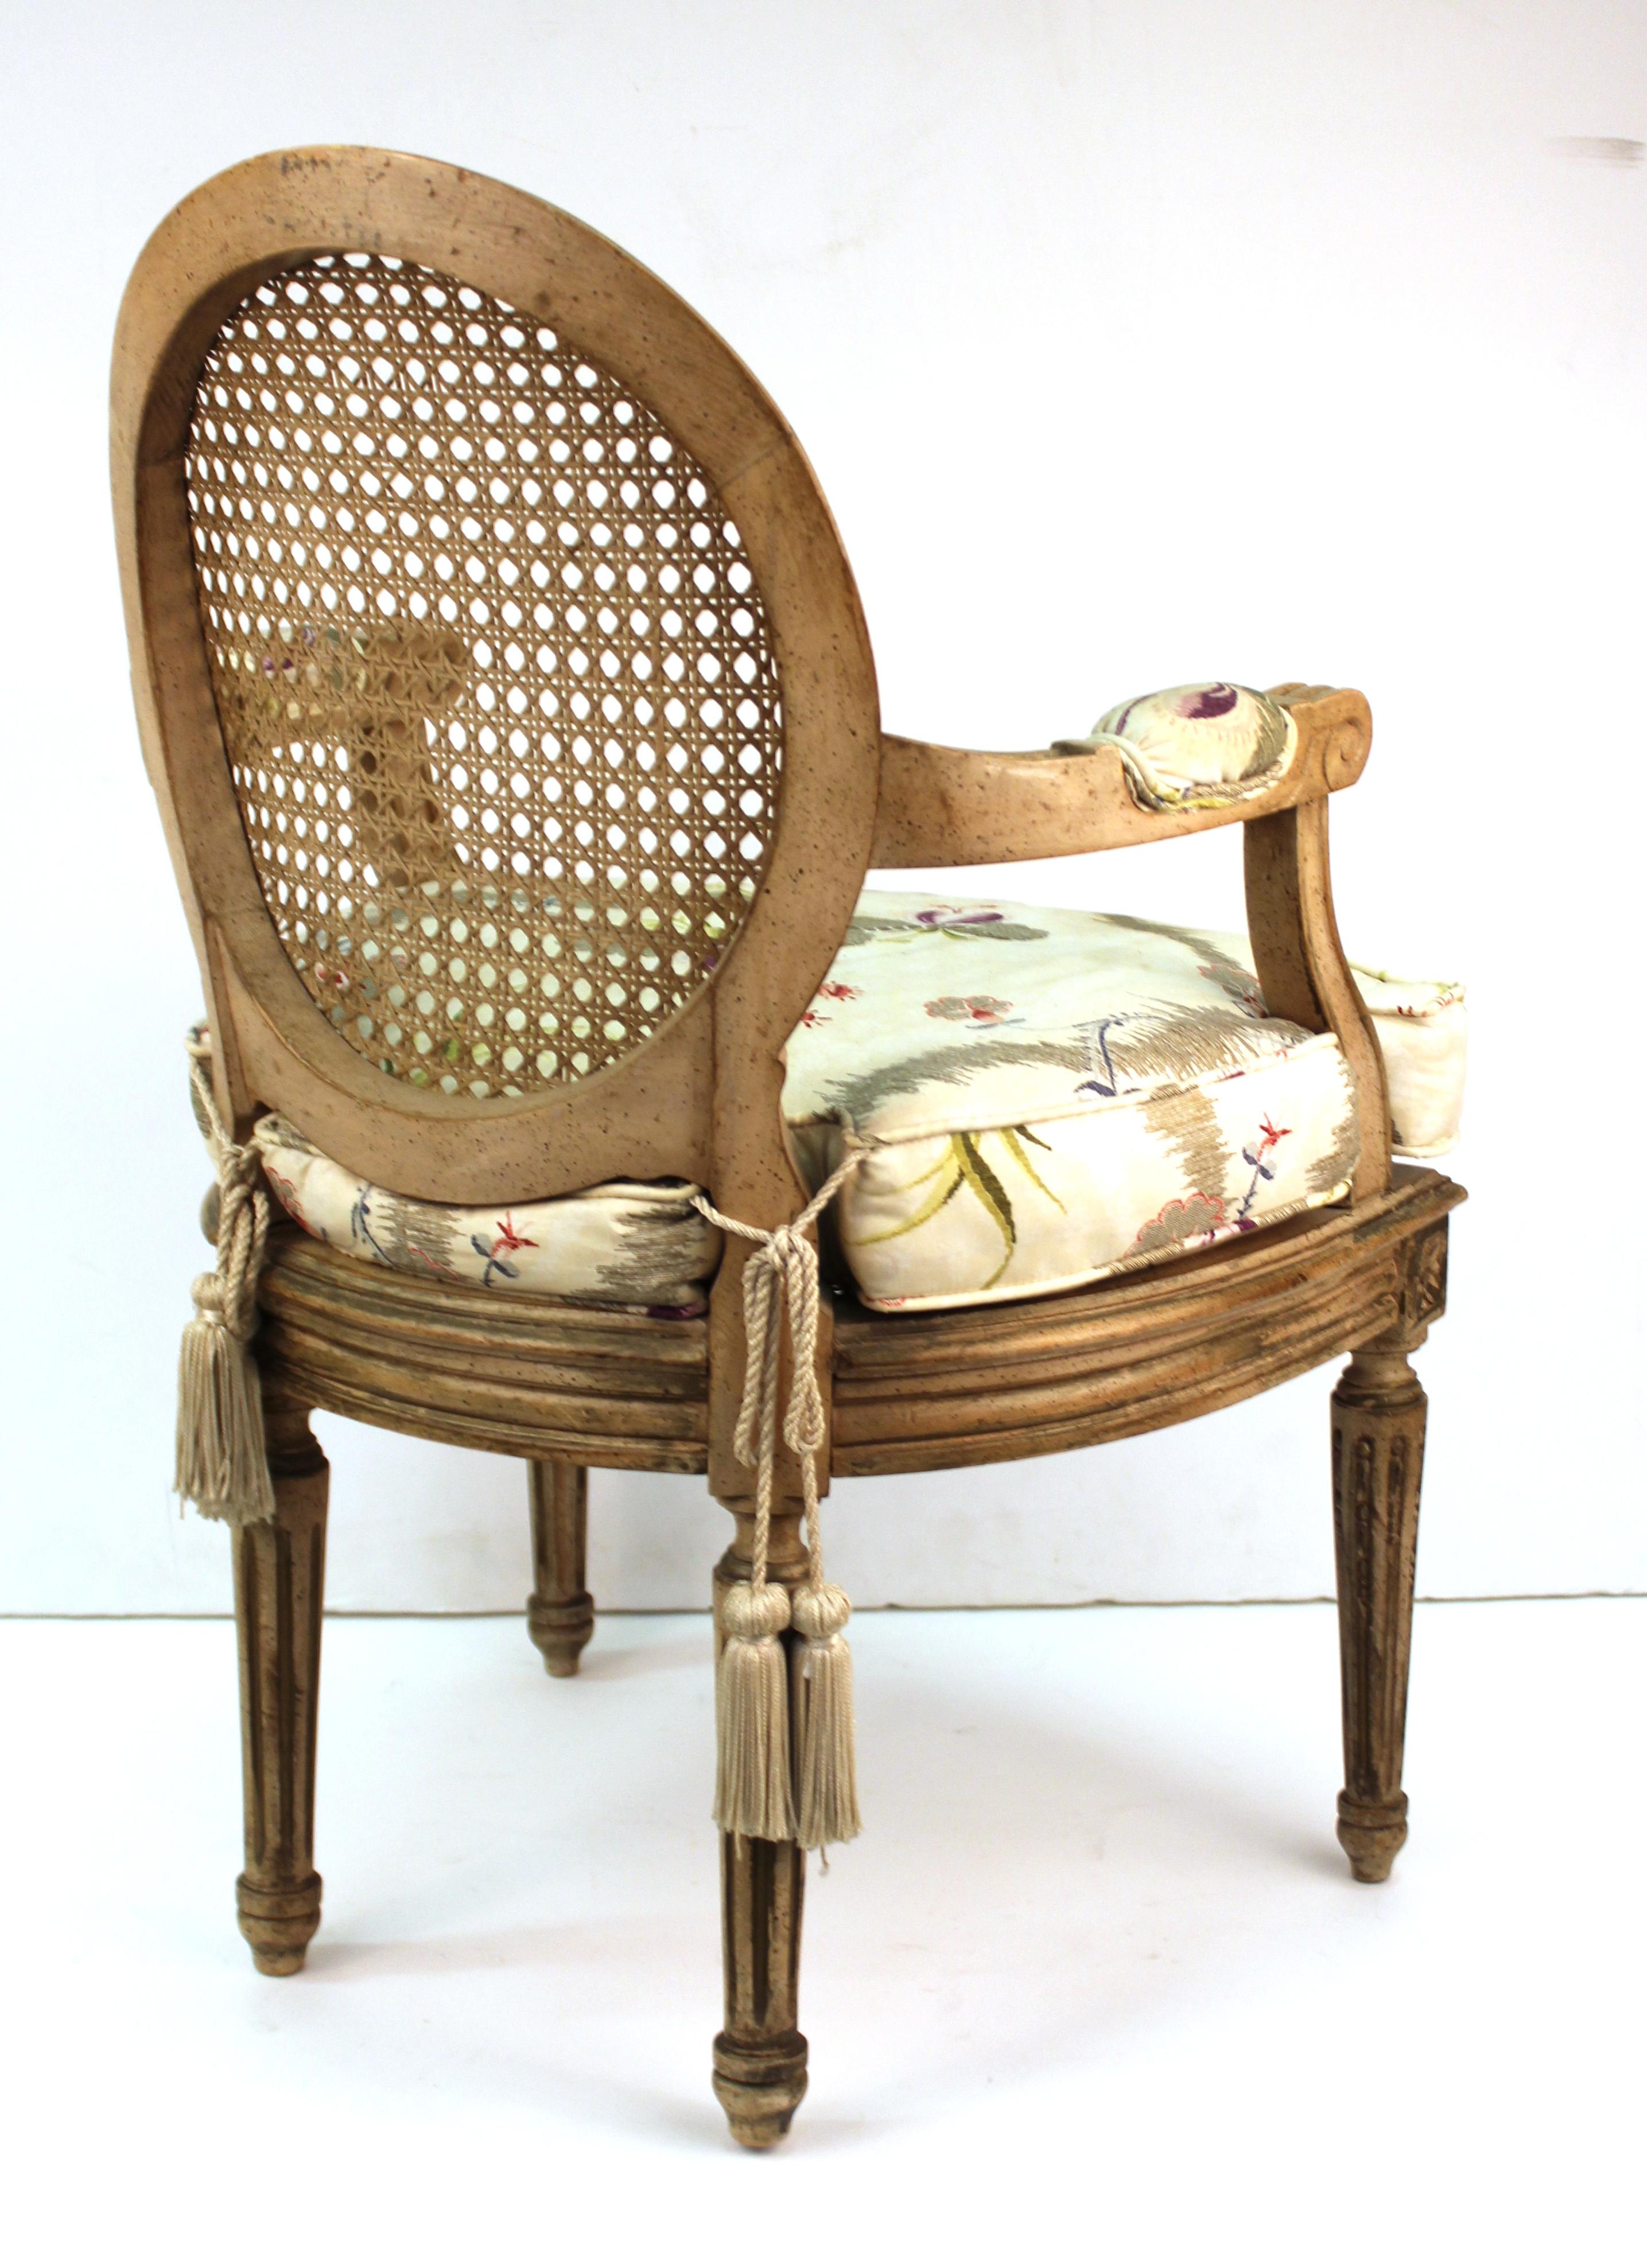 20th Century Louis XVI Style Diminutive Armchair with Caned Seat and Back